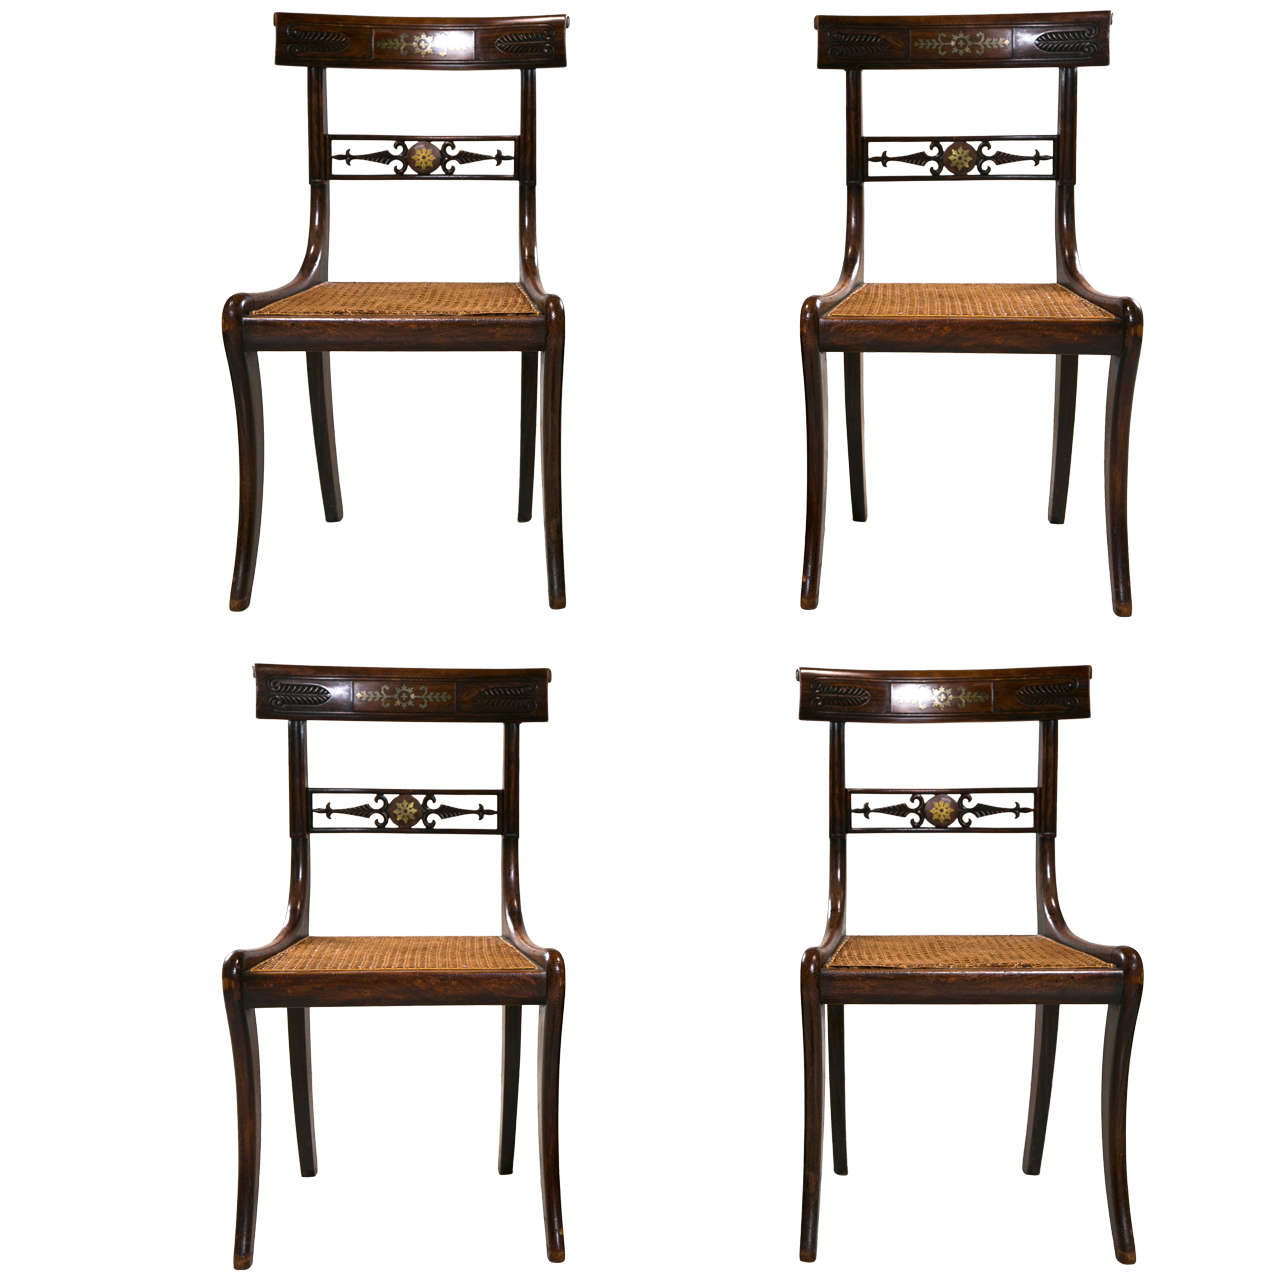 Set of 4 English Regency Rosewood Chairs with Brass Inlay